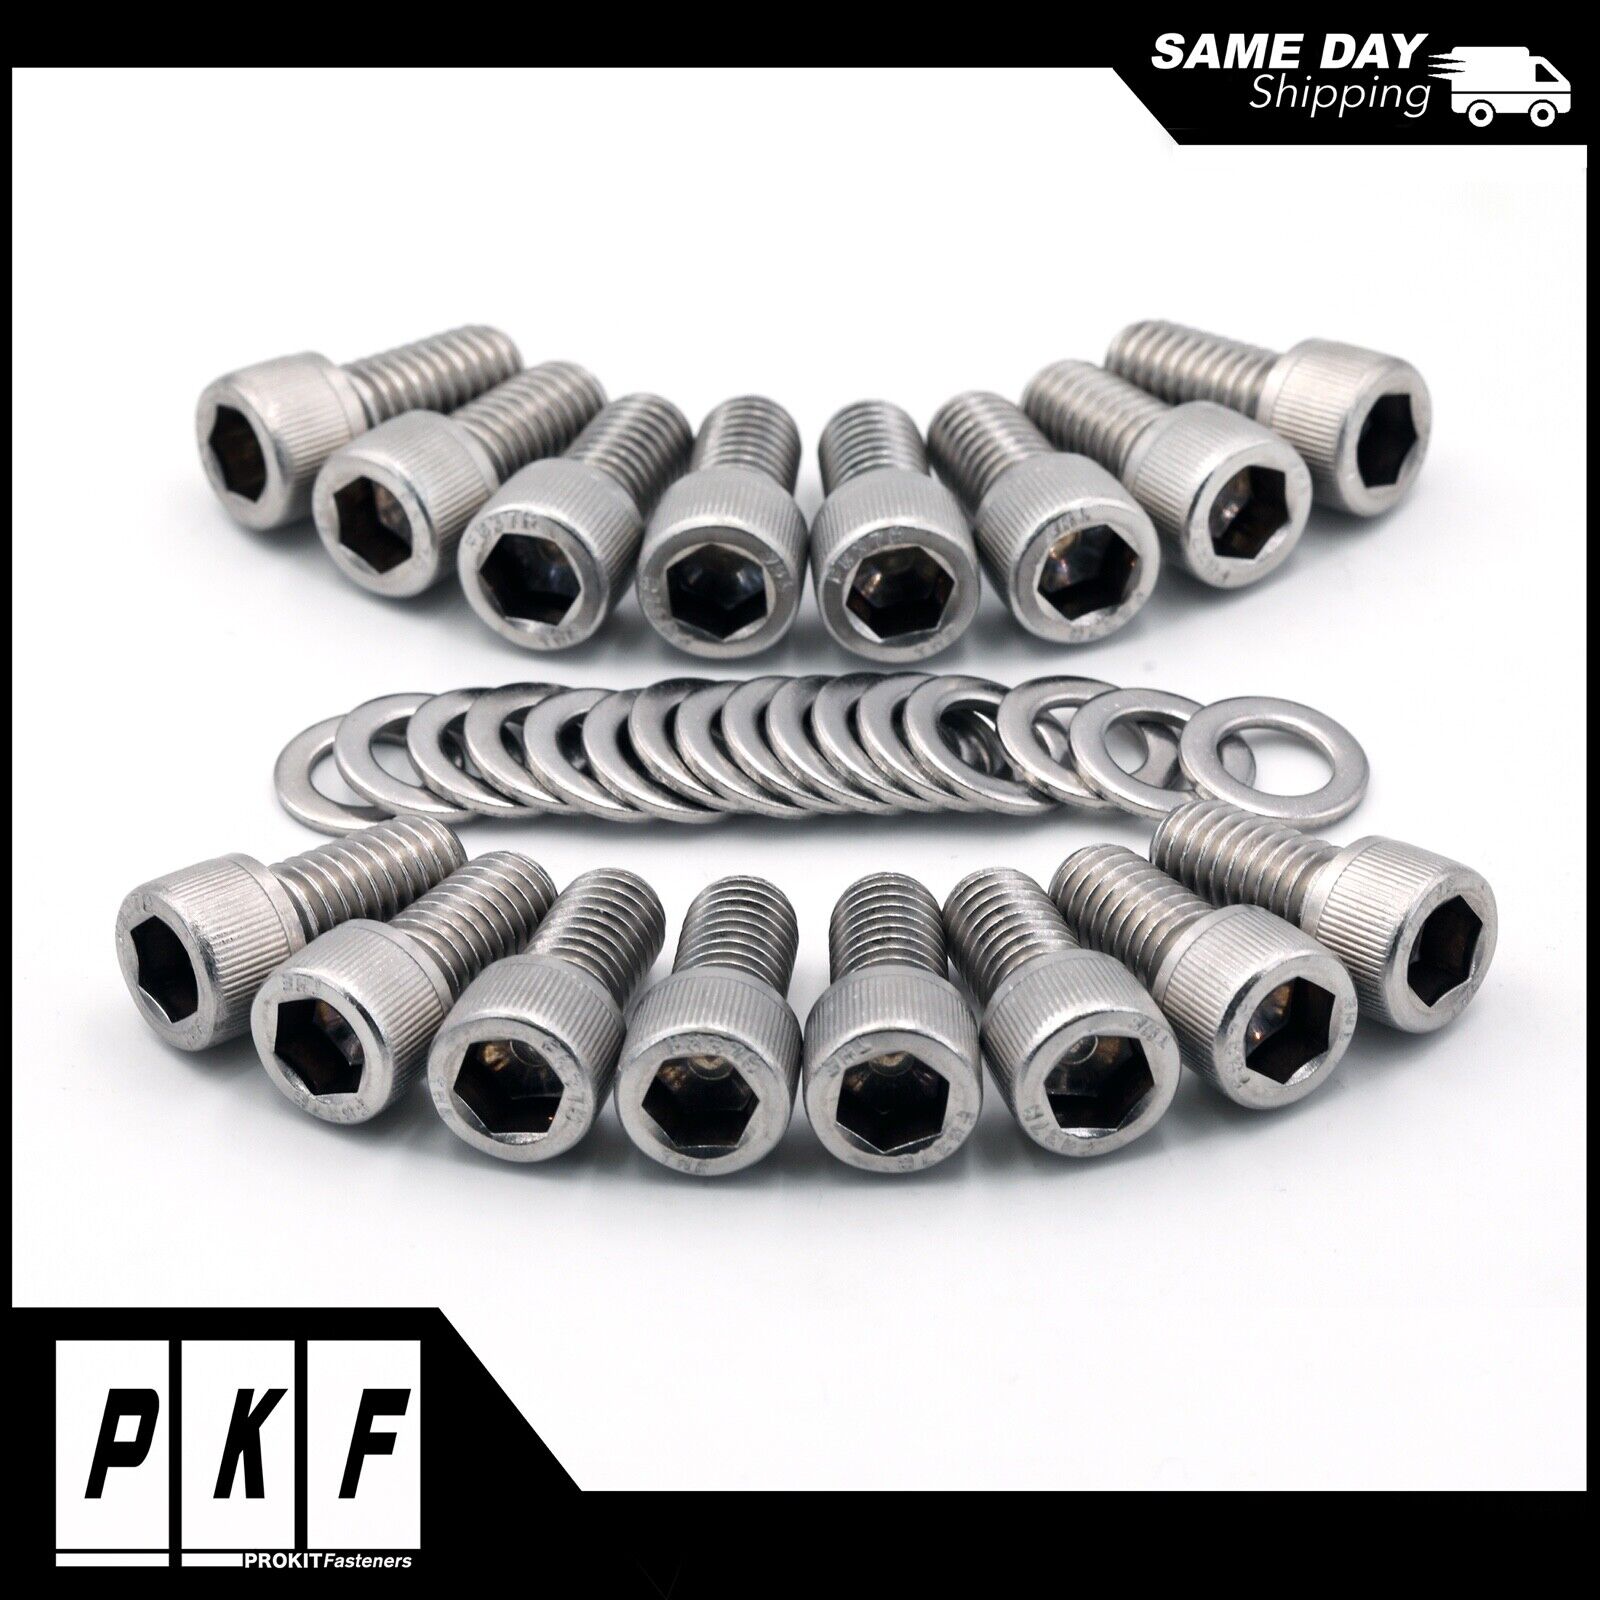 SBF Stainless Steel Header Bolts for Small Block Ford 260 289 302 351 Windsor